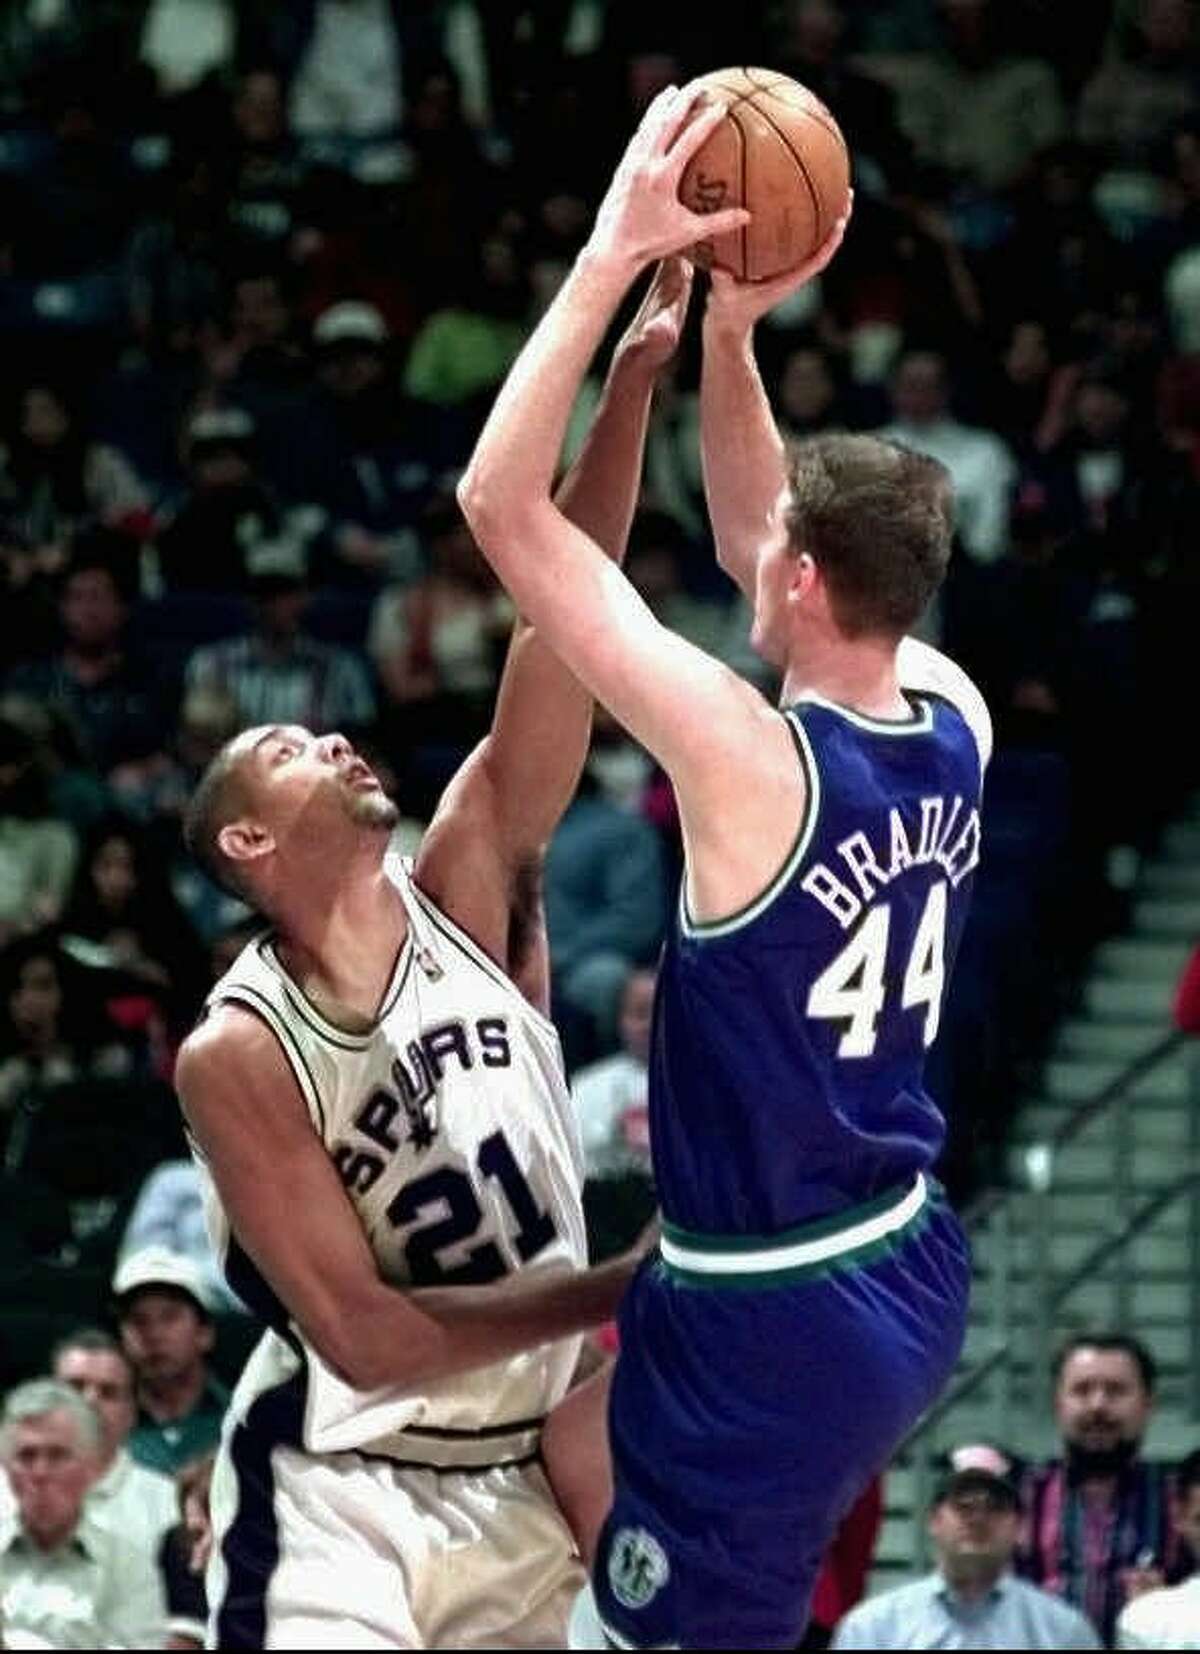 San Antonio Spurs Tim Duncan (21) blocks the attempted shot by Dallas Mavericks center Shawn Bradley (44) during first quarter action of their preseason game at the Alamodome in San Antonio , Wednesday Oct. 22, 1997. (Express-News,Doug Sehres)